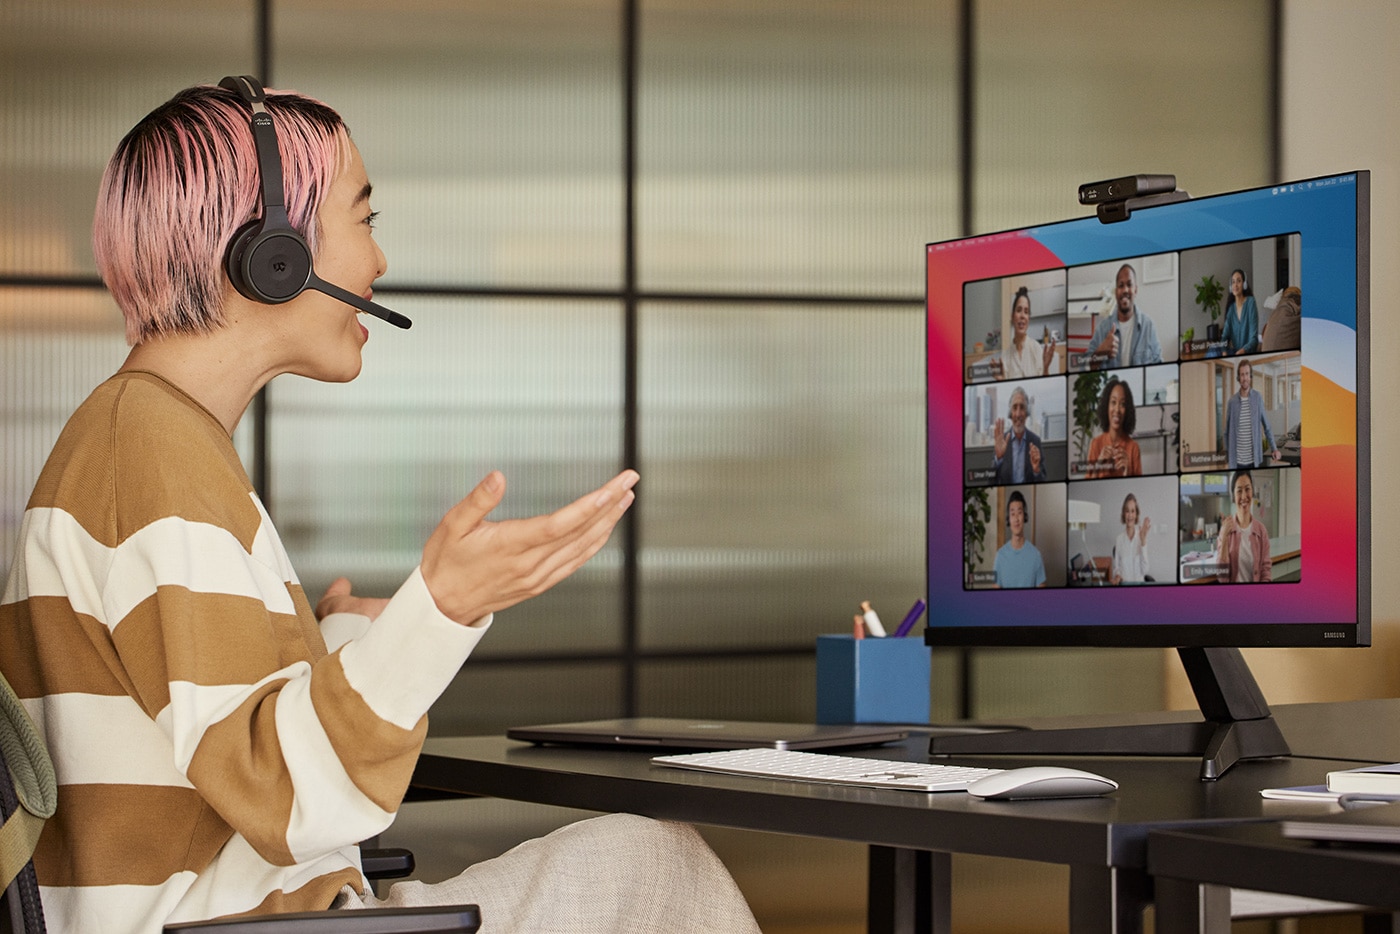 Woman wearing Cisco headset talks with team in grid view on video conference using Cisco desk camera.